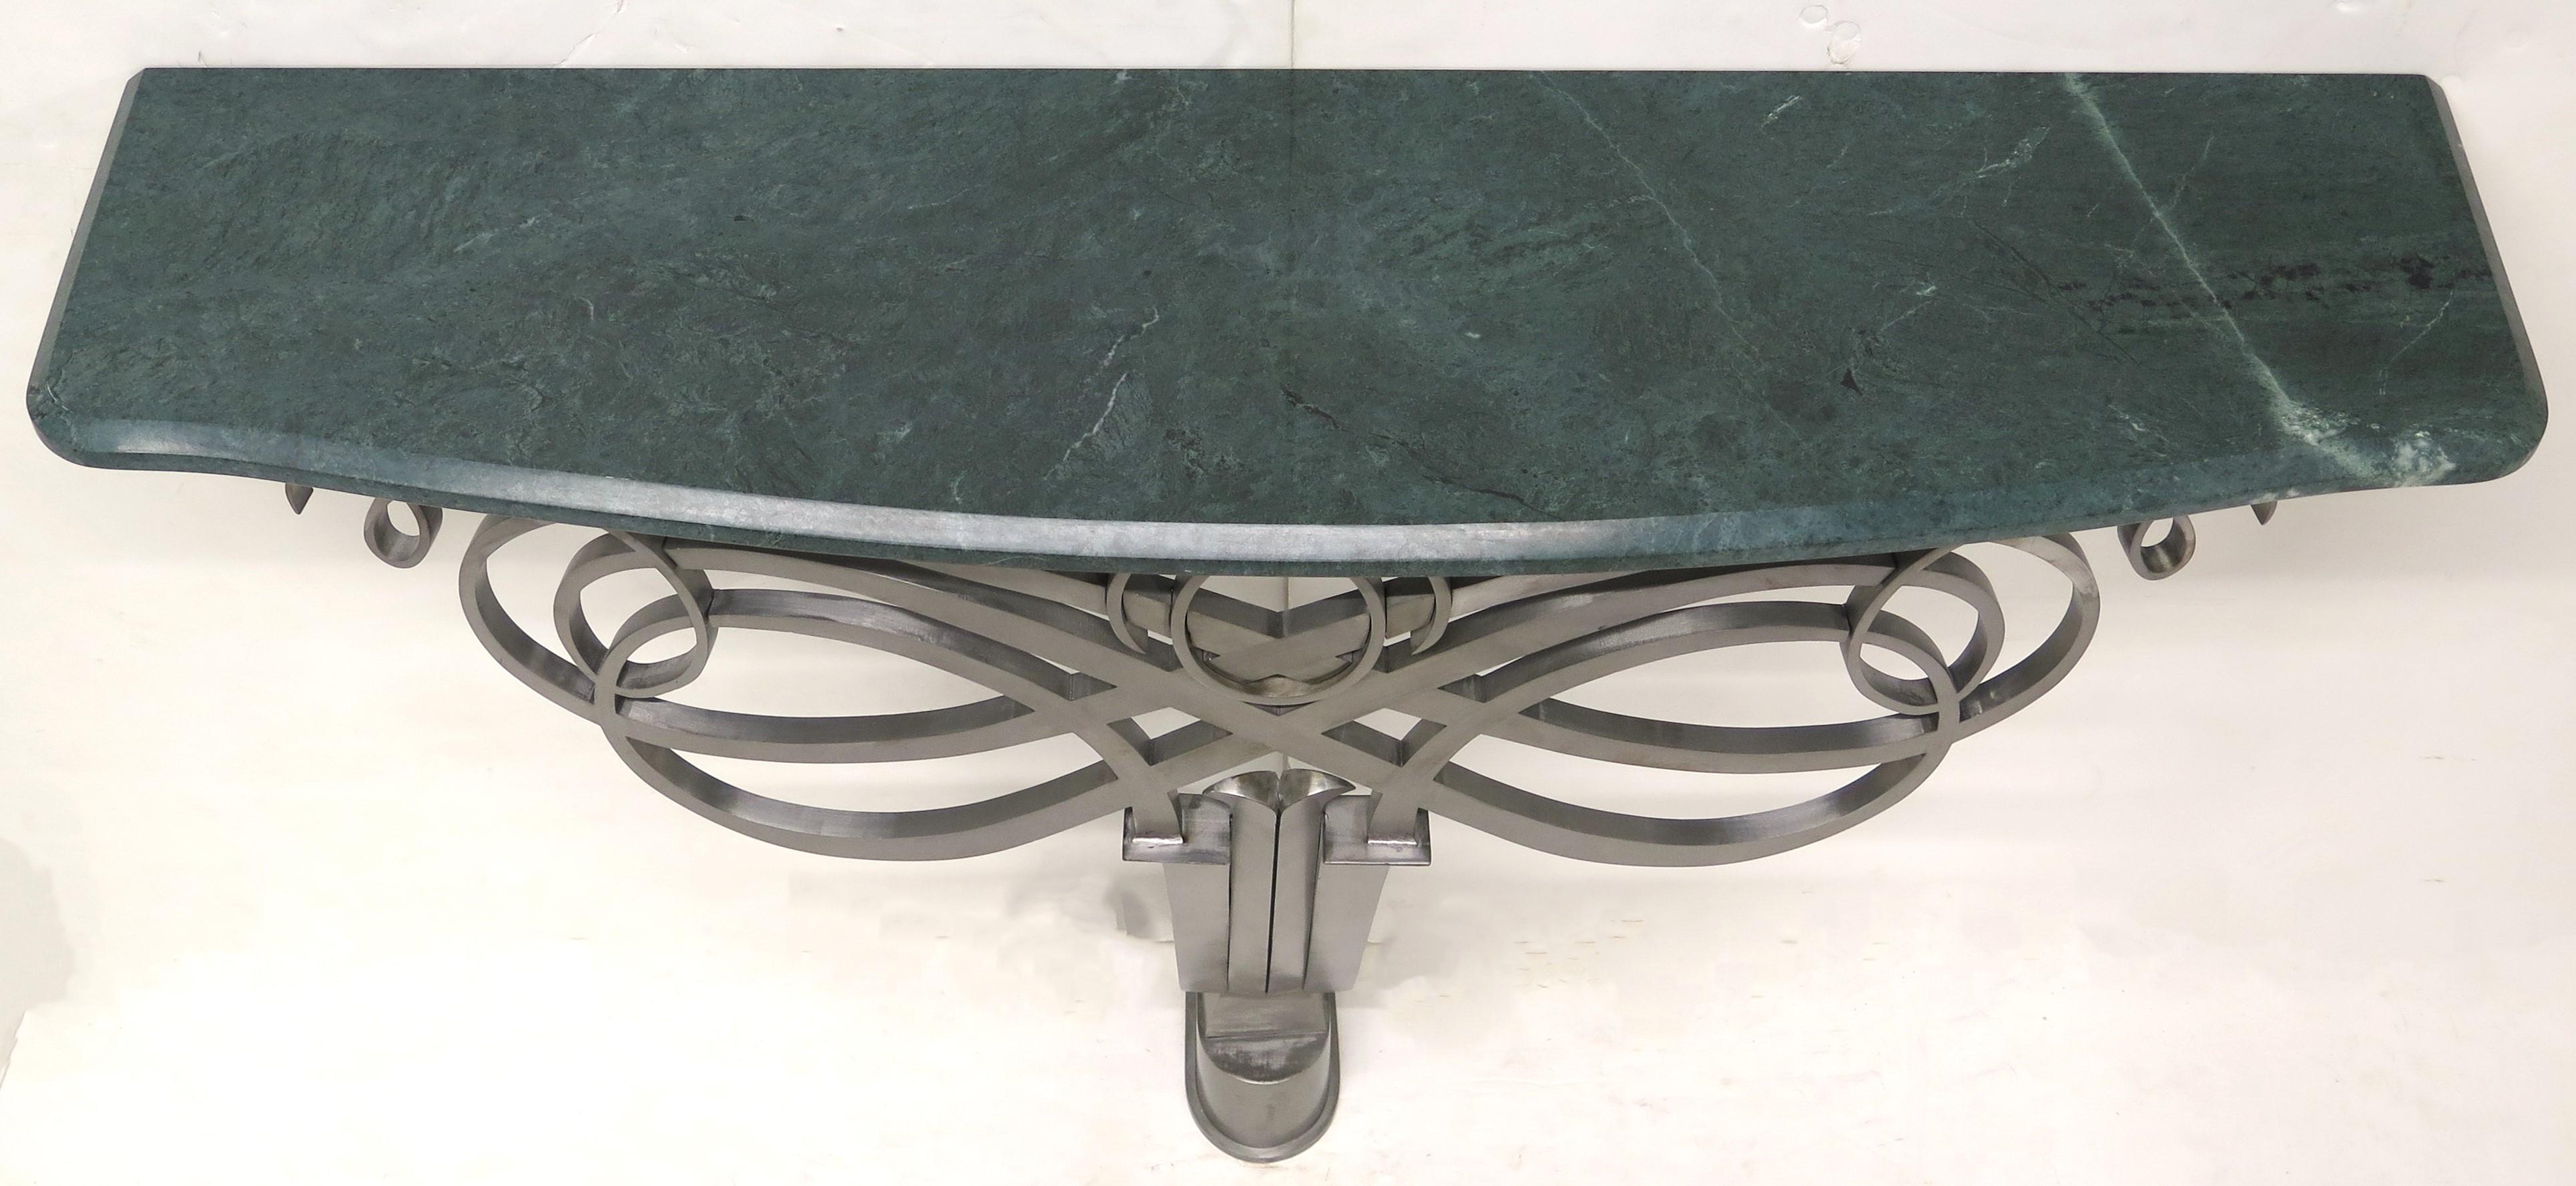 an elegant Art Deco solid stainless steel and green marble wall mounted console table, in the style of metalsmith Raymond Subes (French, 1893-1970). France, 20th century

38.25